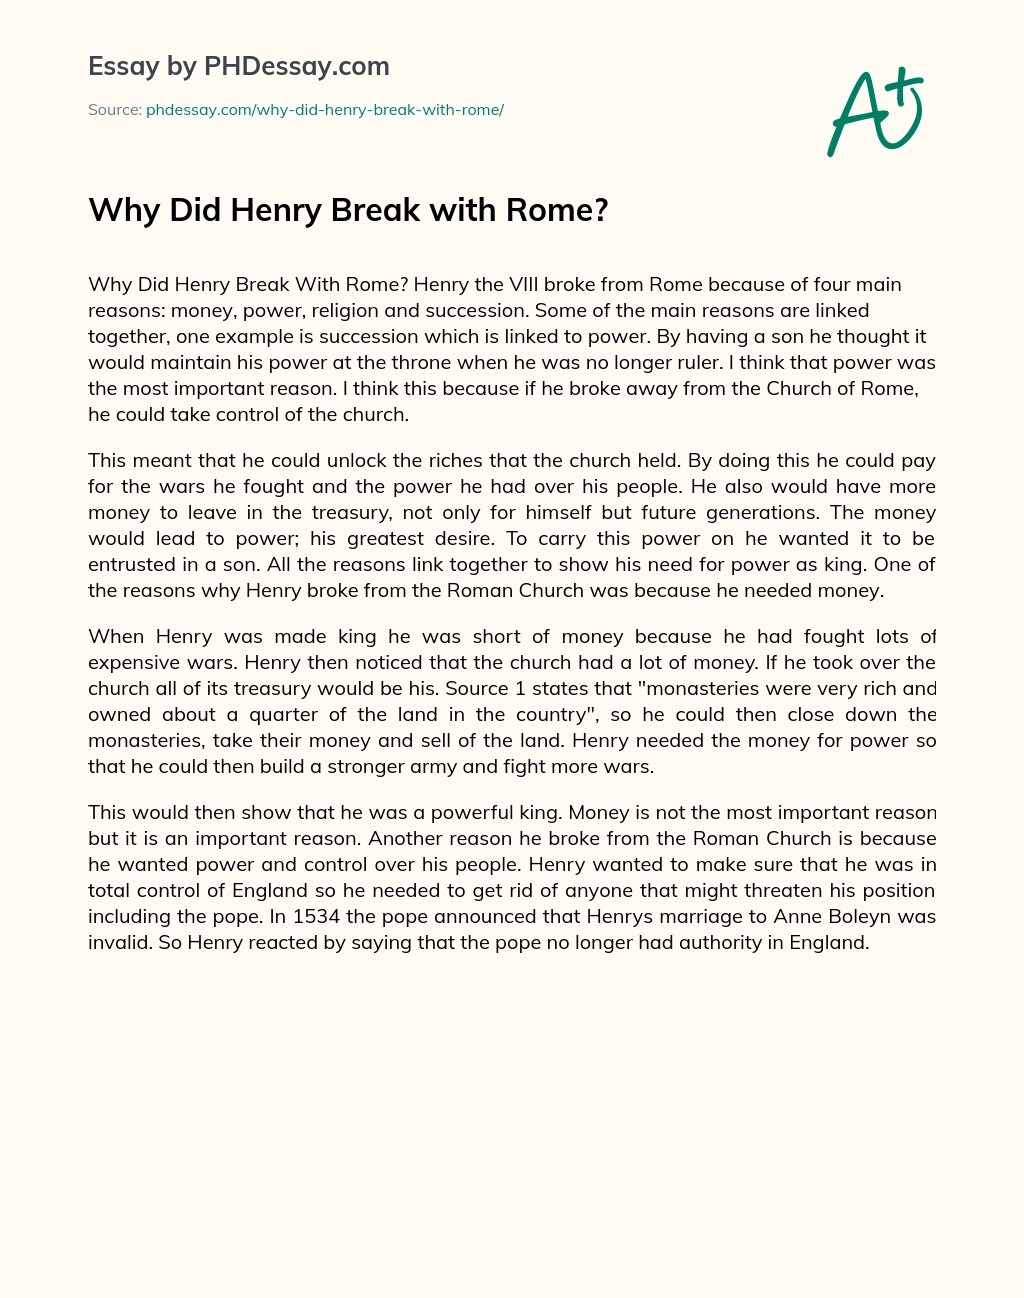 Why Did Henry Break with Rome? essay